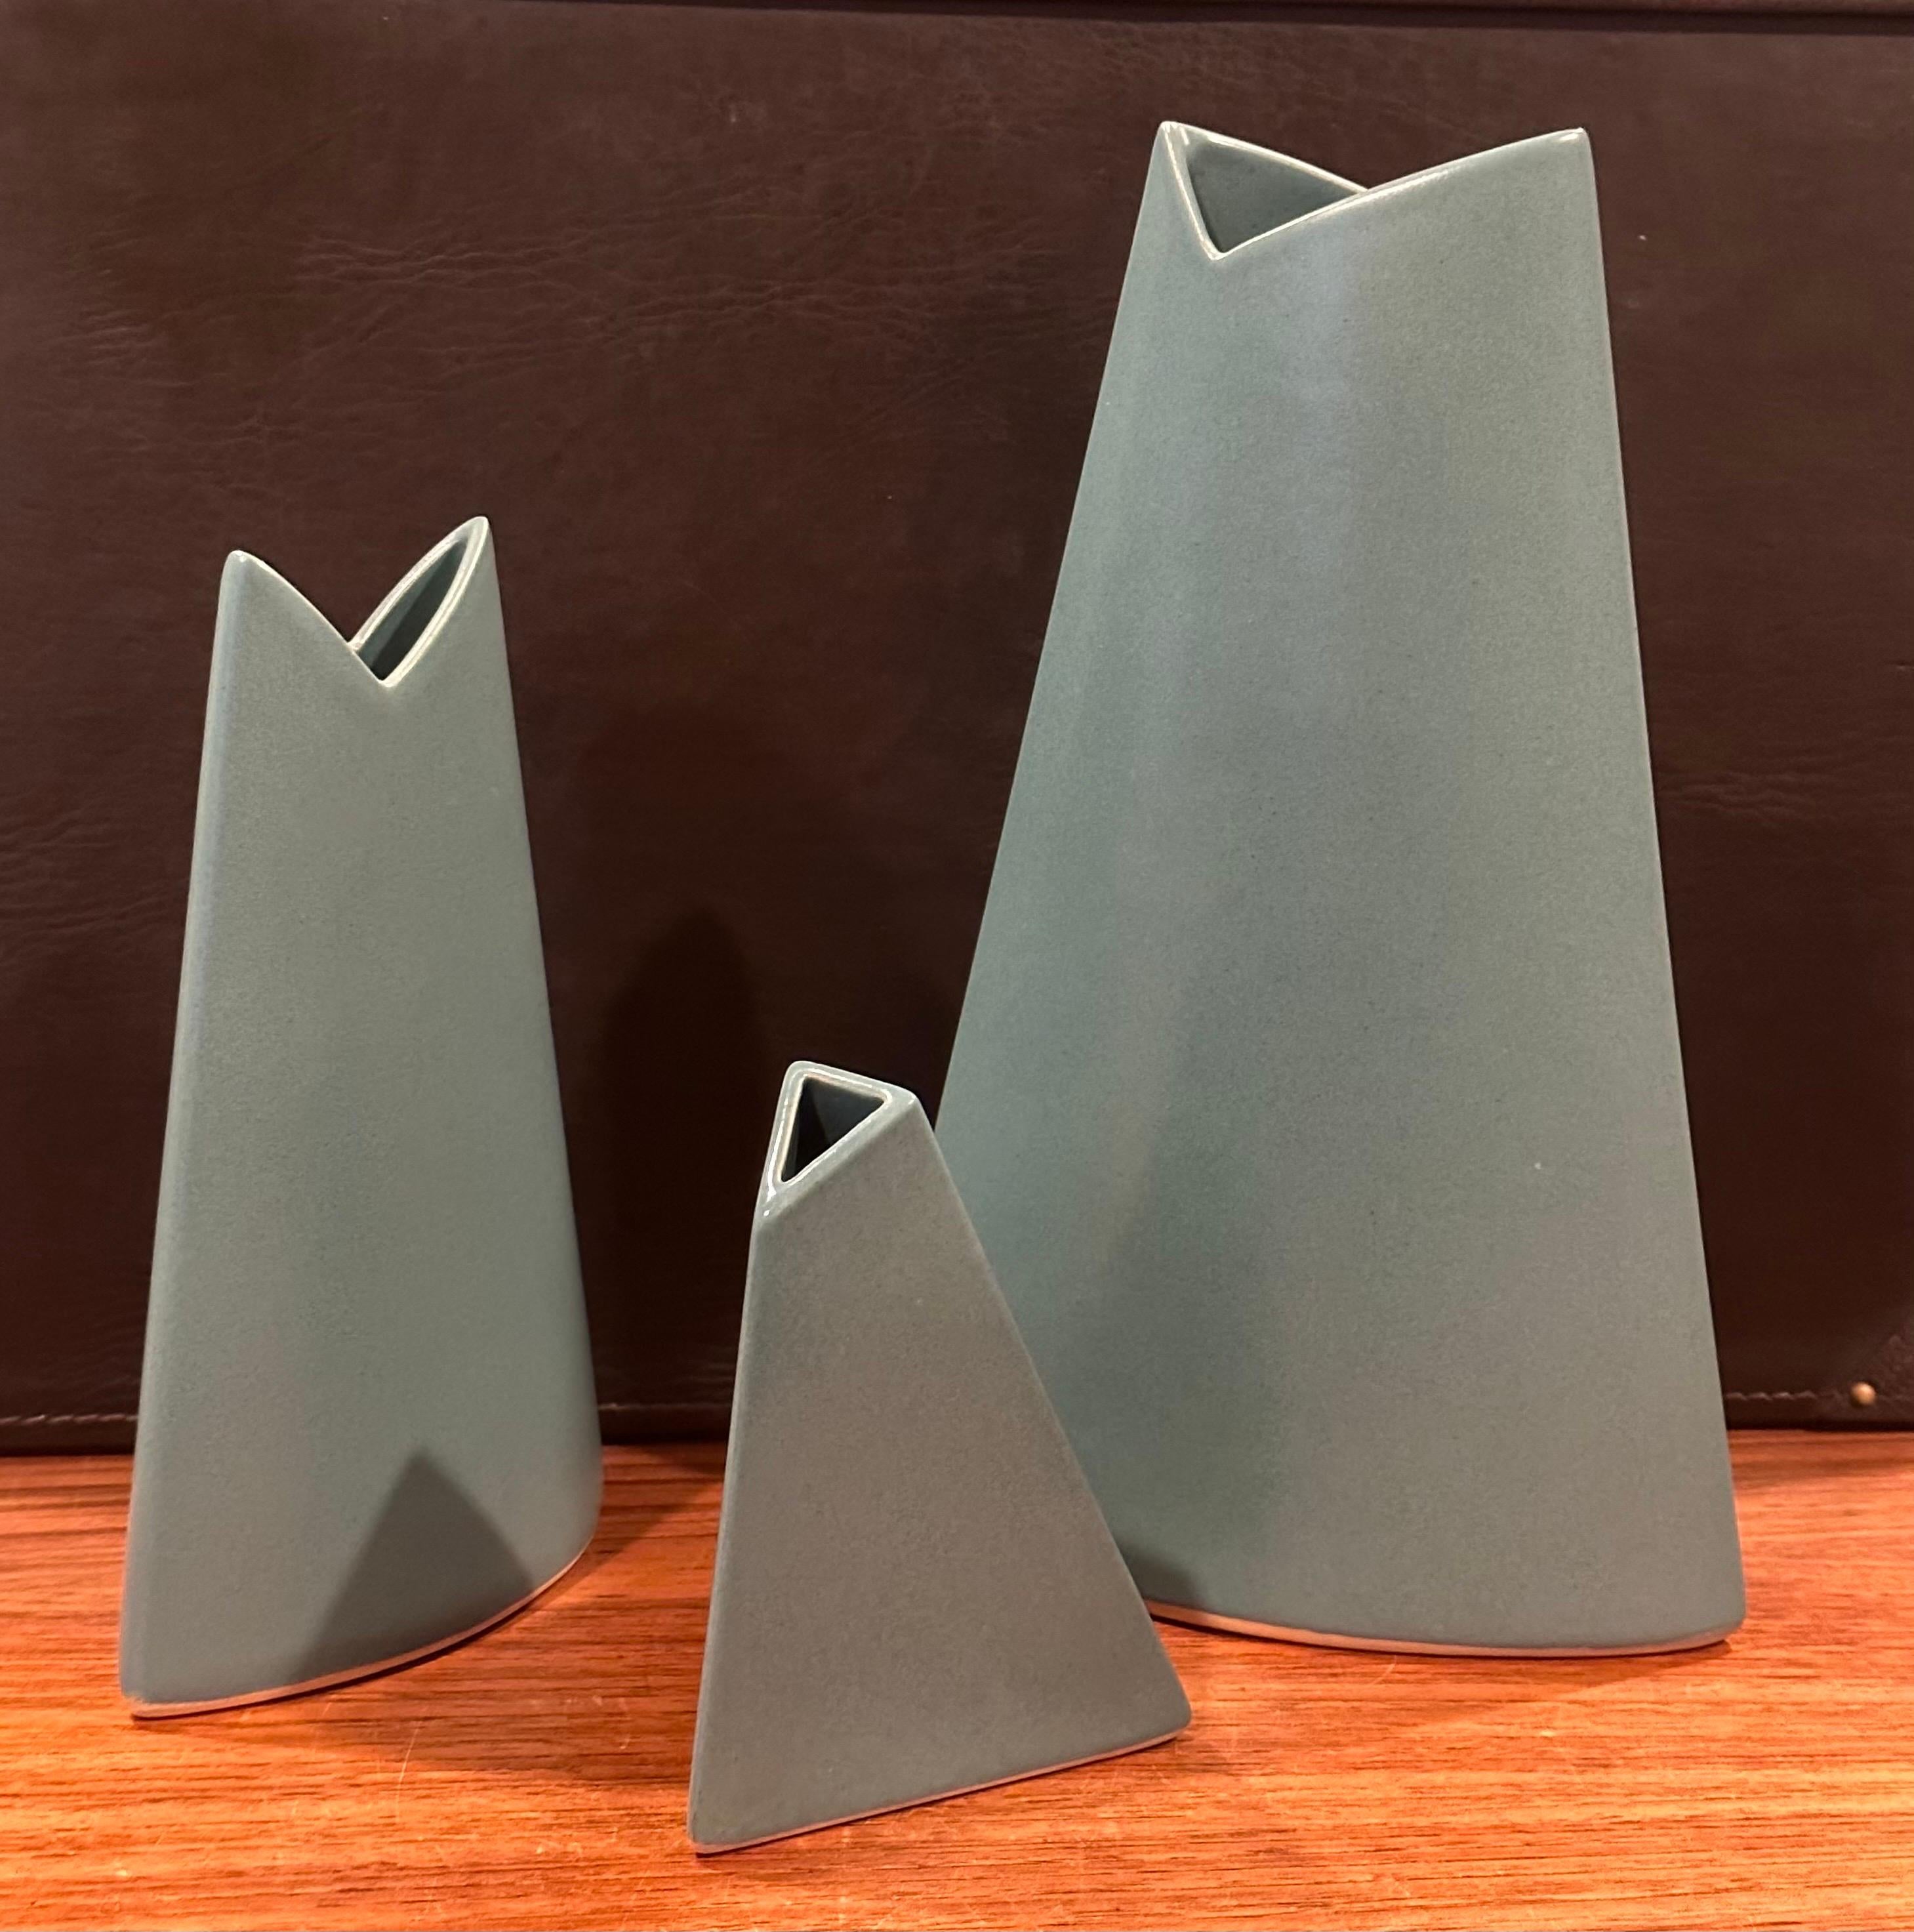 Set of Three Post-Modern Geometric Ceramic Vases by James Johnston In Good Condition For Sale In San Diego, CA